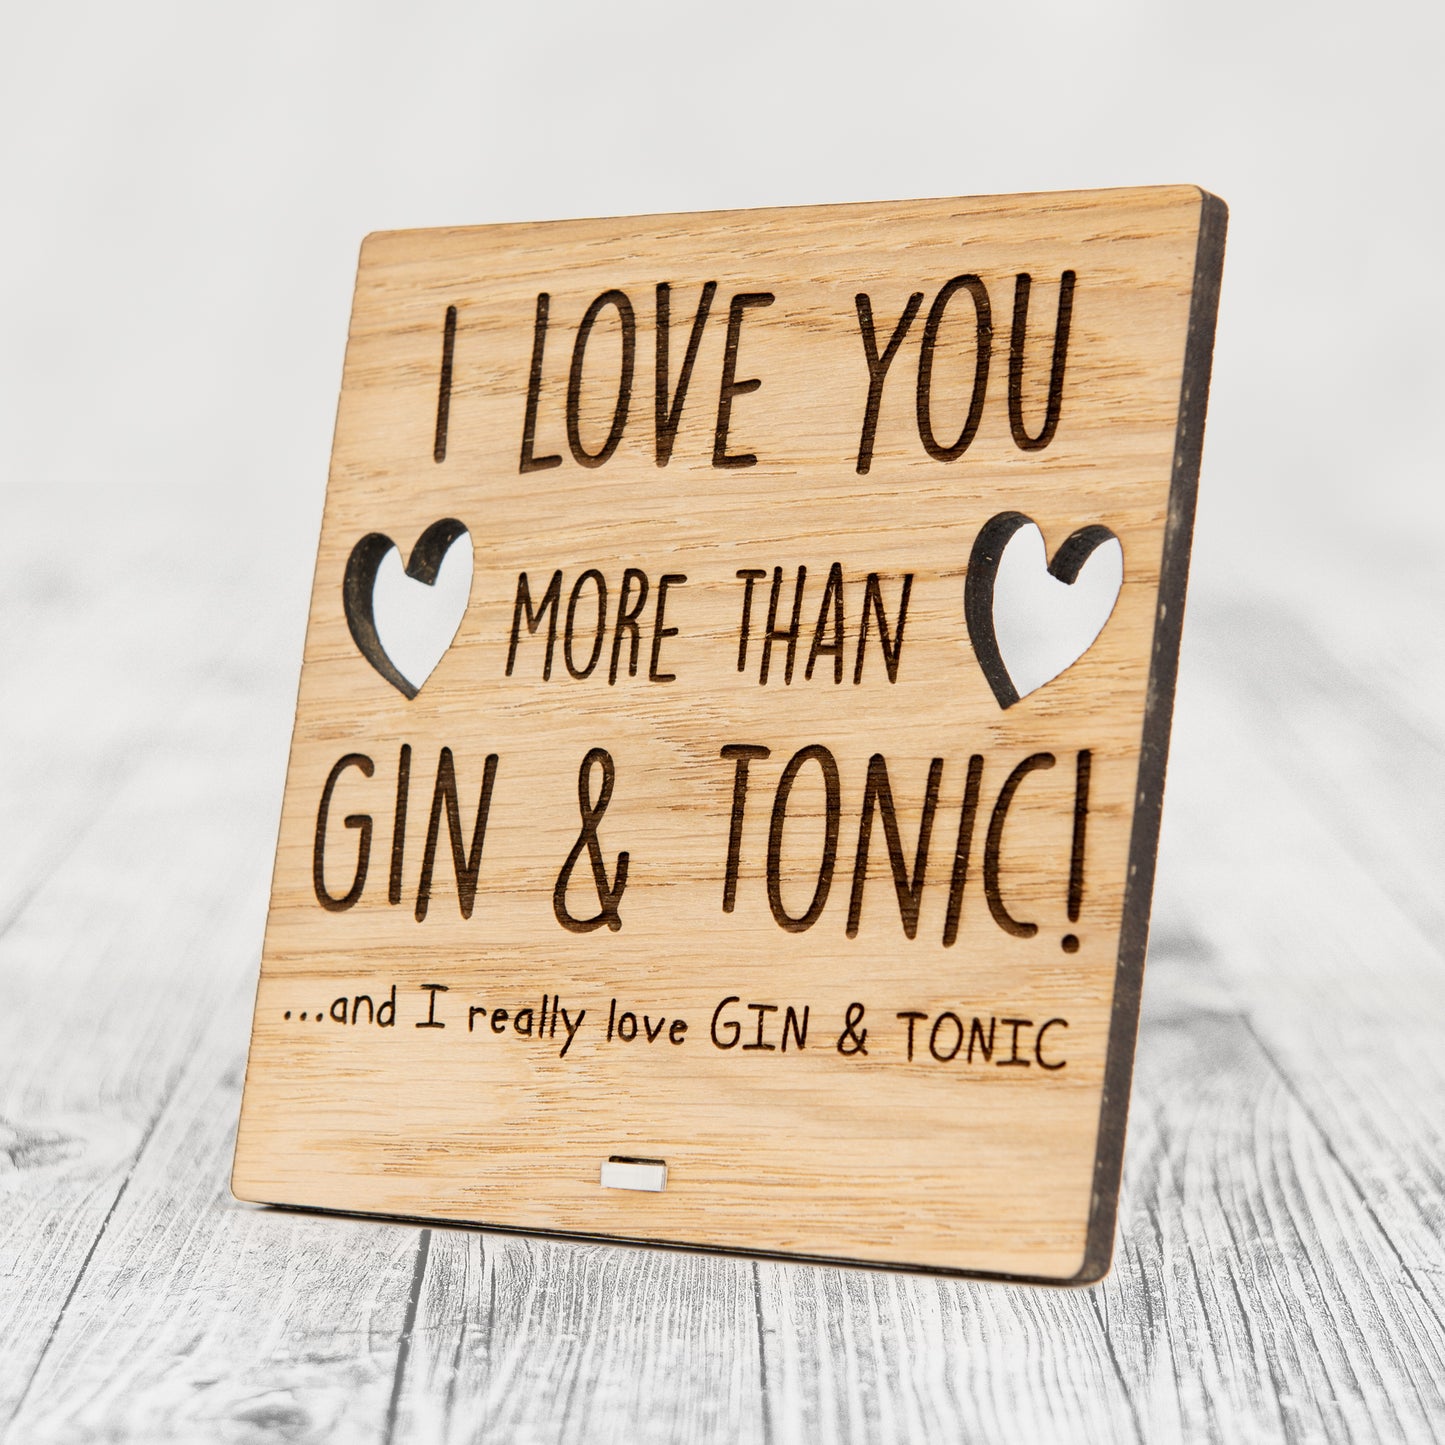 I Love You More Than GIN AND TONIC - Wooden Valentine's Day Plaque